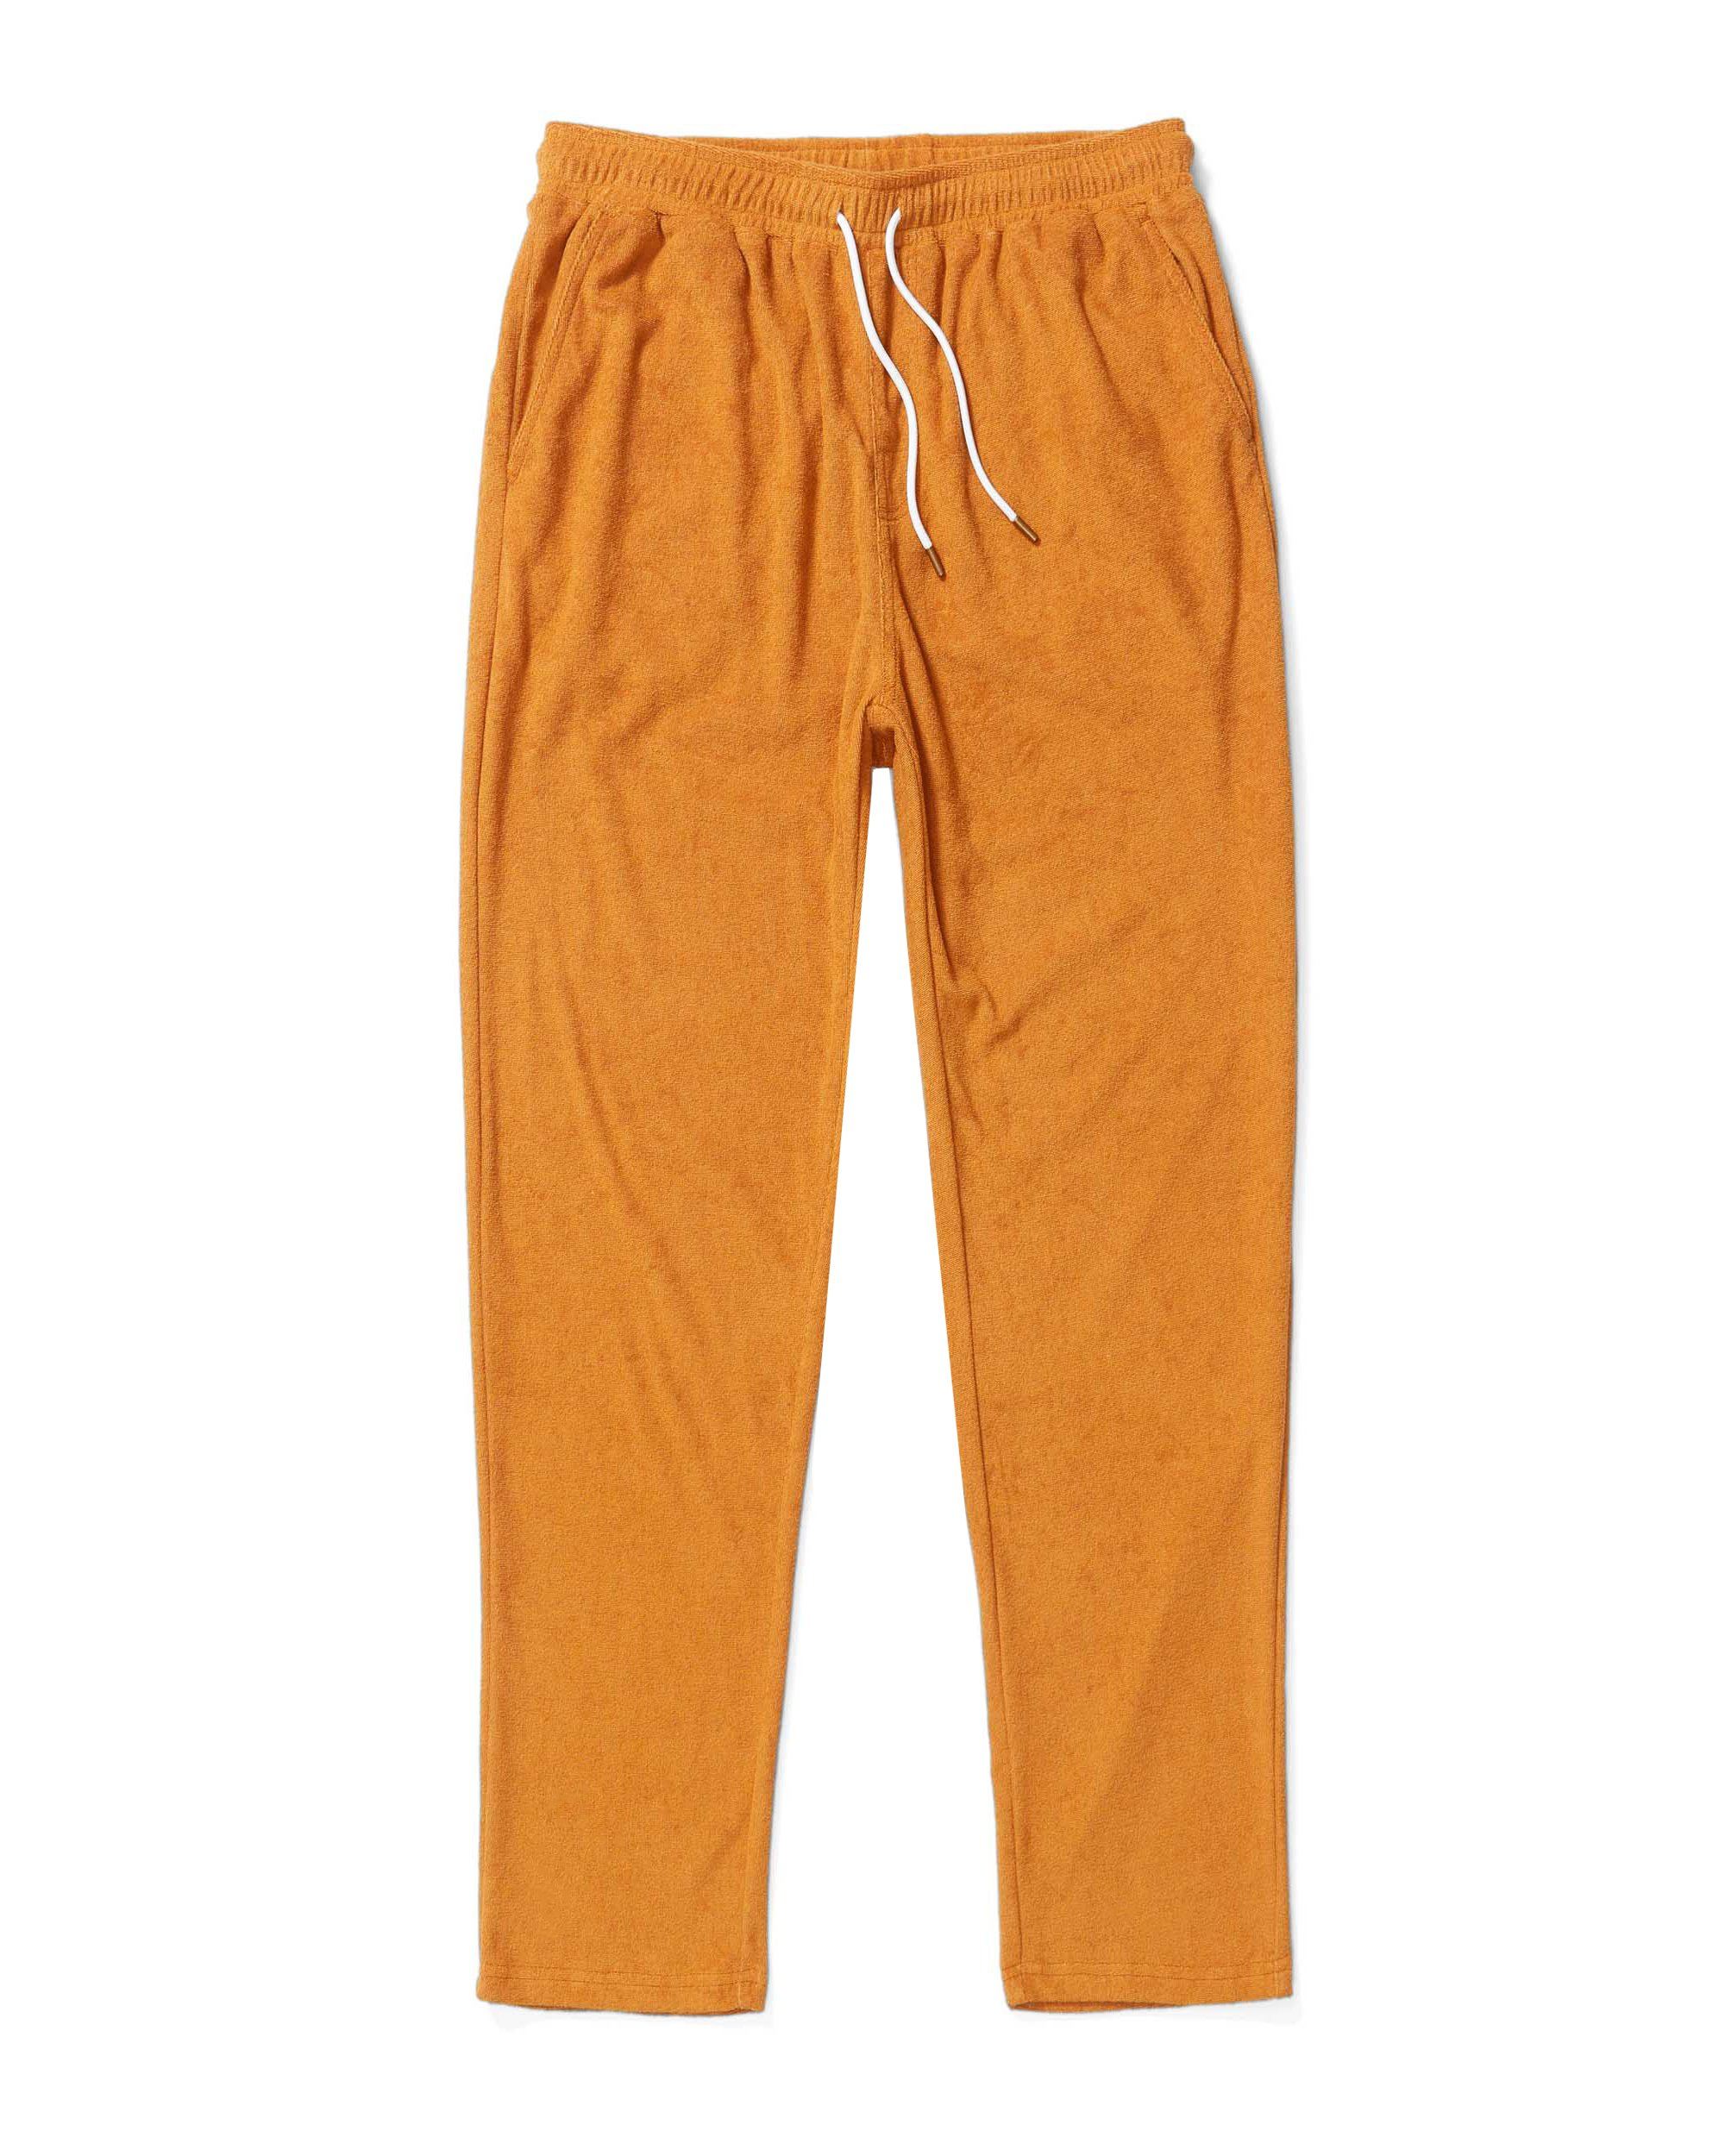 Image of The Tropez Terry Cloth Pants